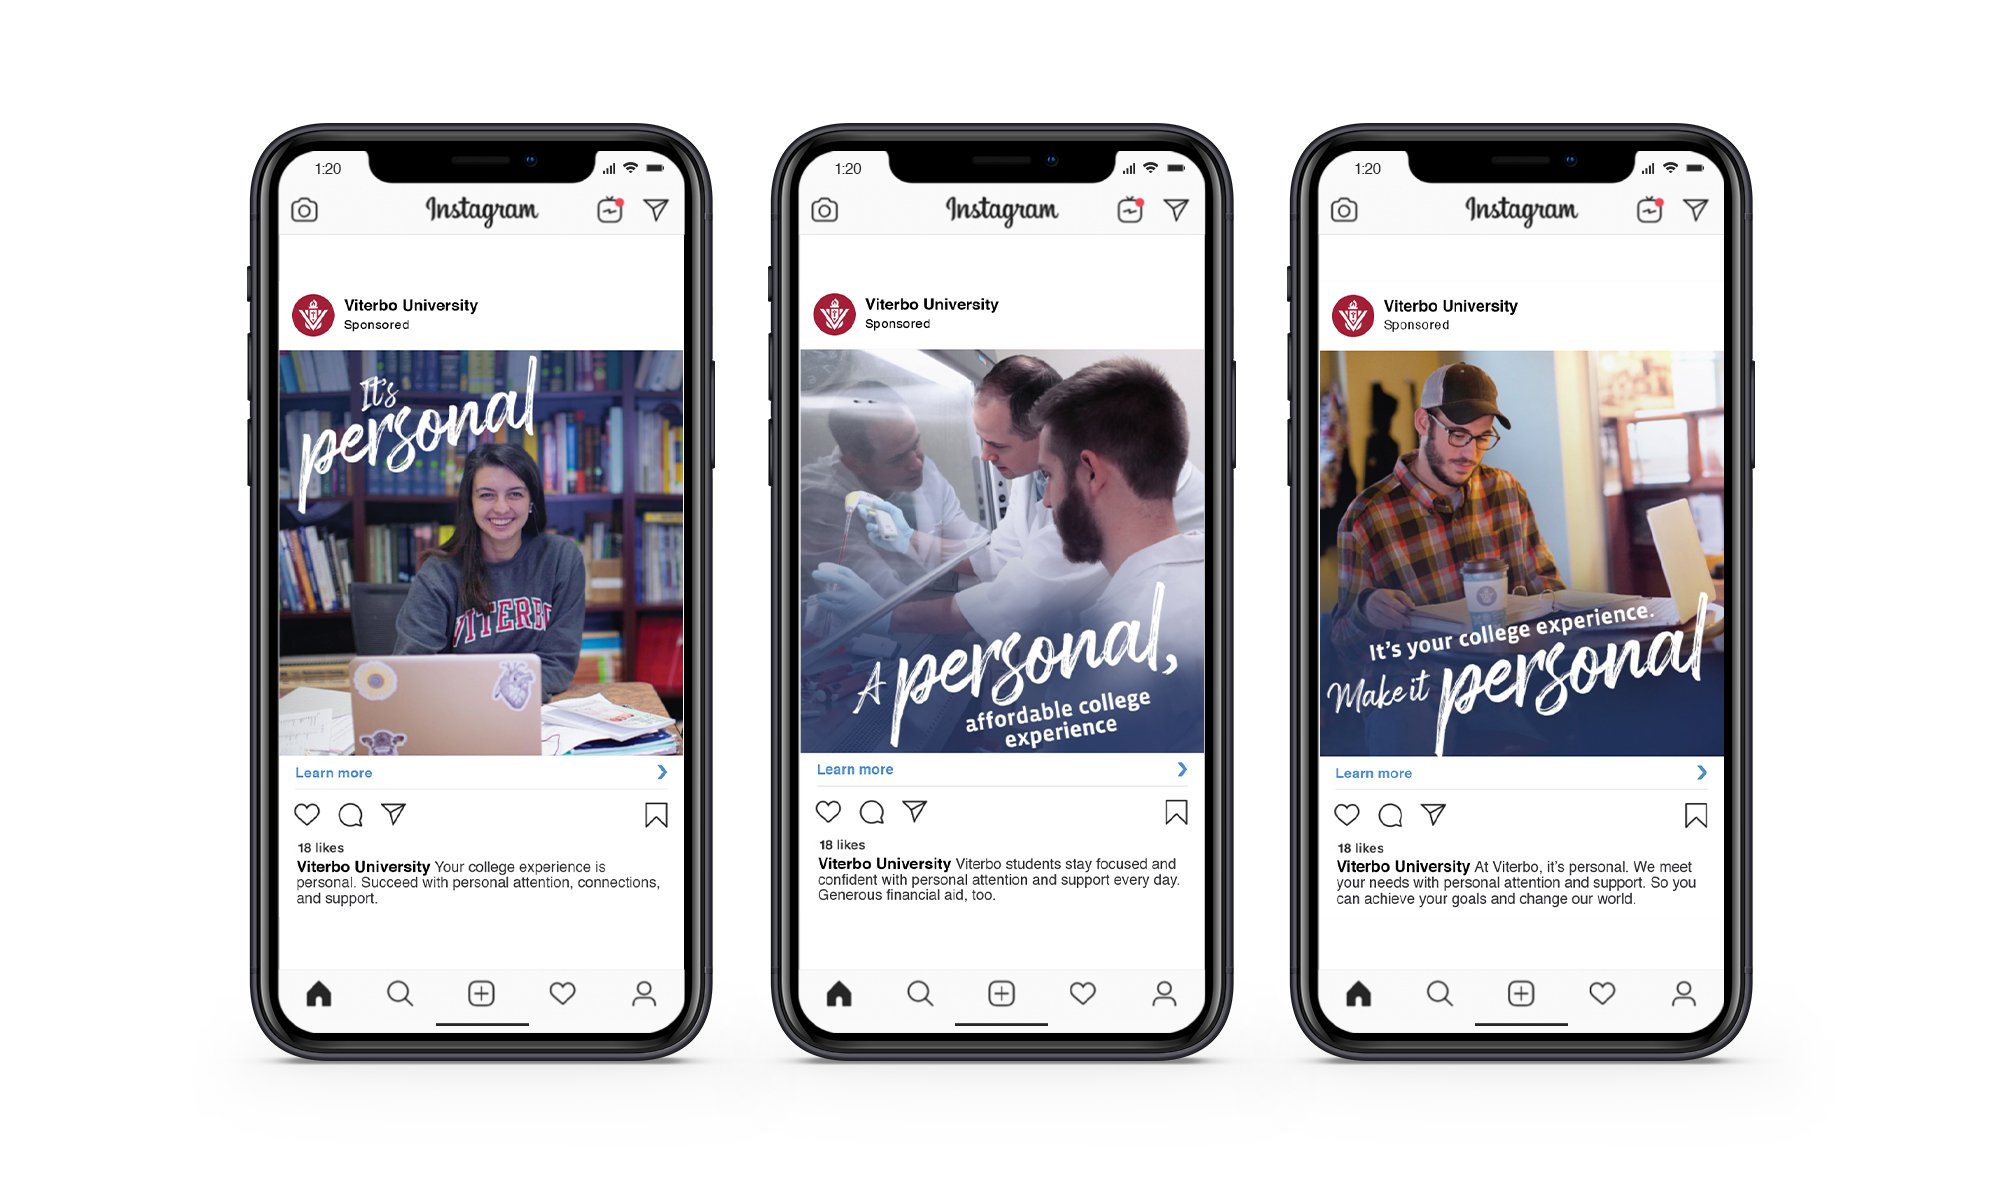 Viterbo University Instagram ads with It’s Personal headlines, benefit info and Learn more link shown on mobile phone screens